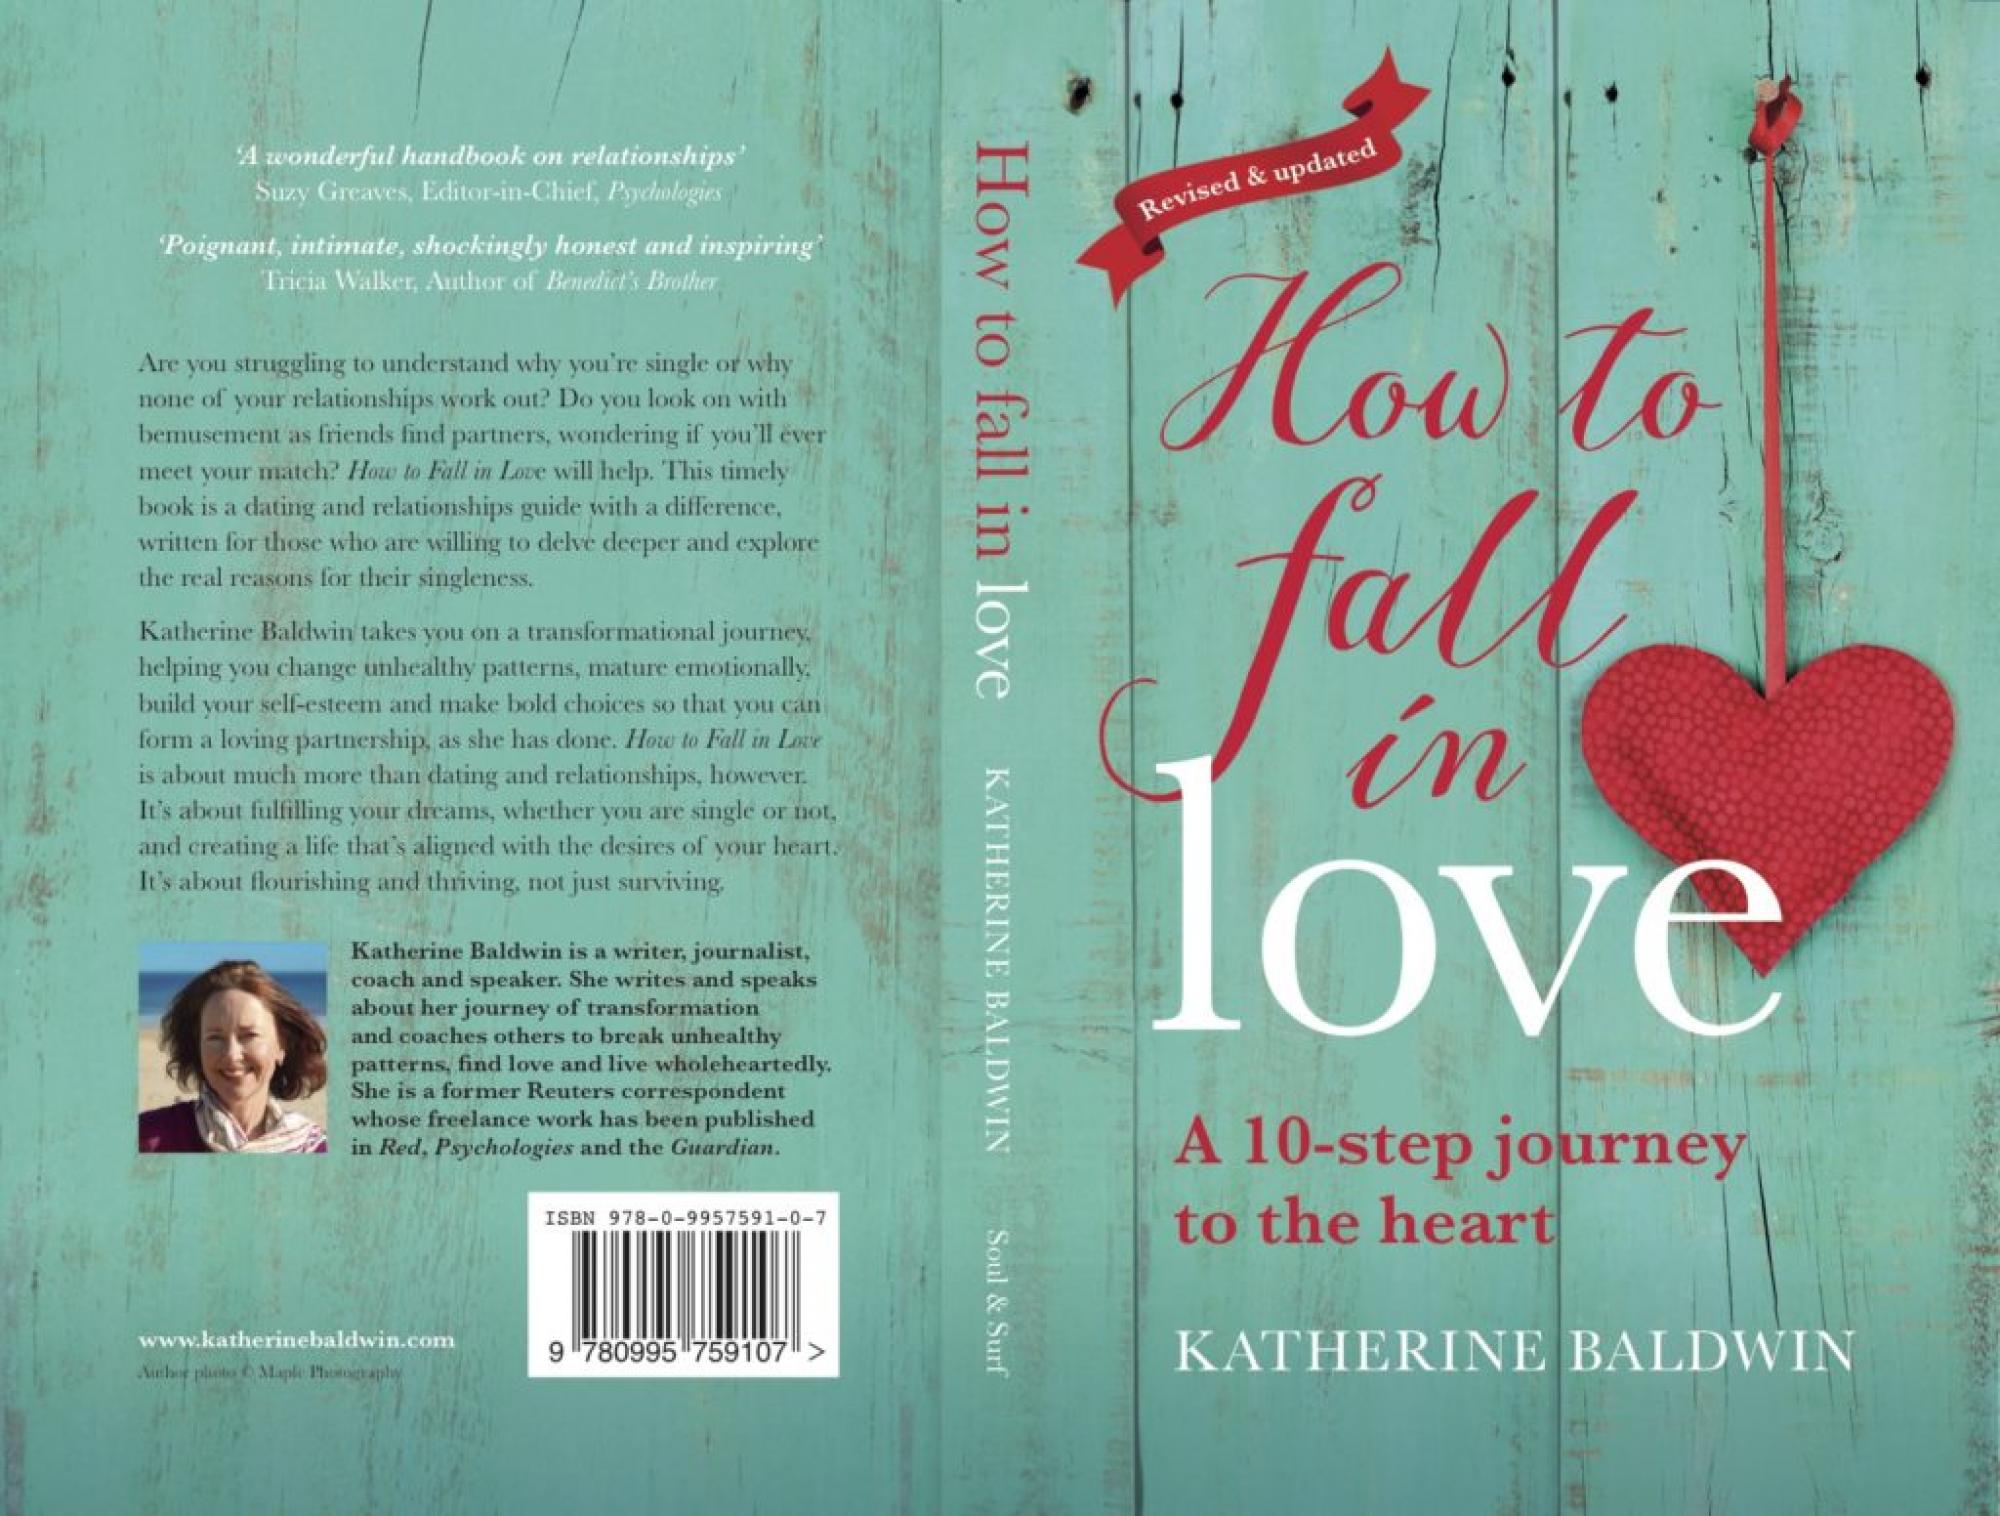 How to fall in love – A 10-step journey to the heart by Katherine Baldwin